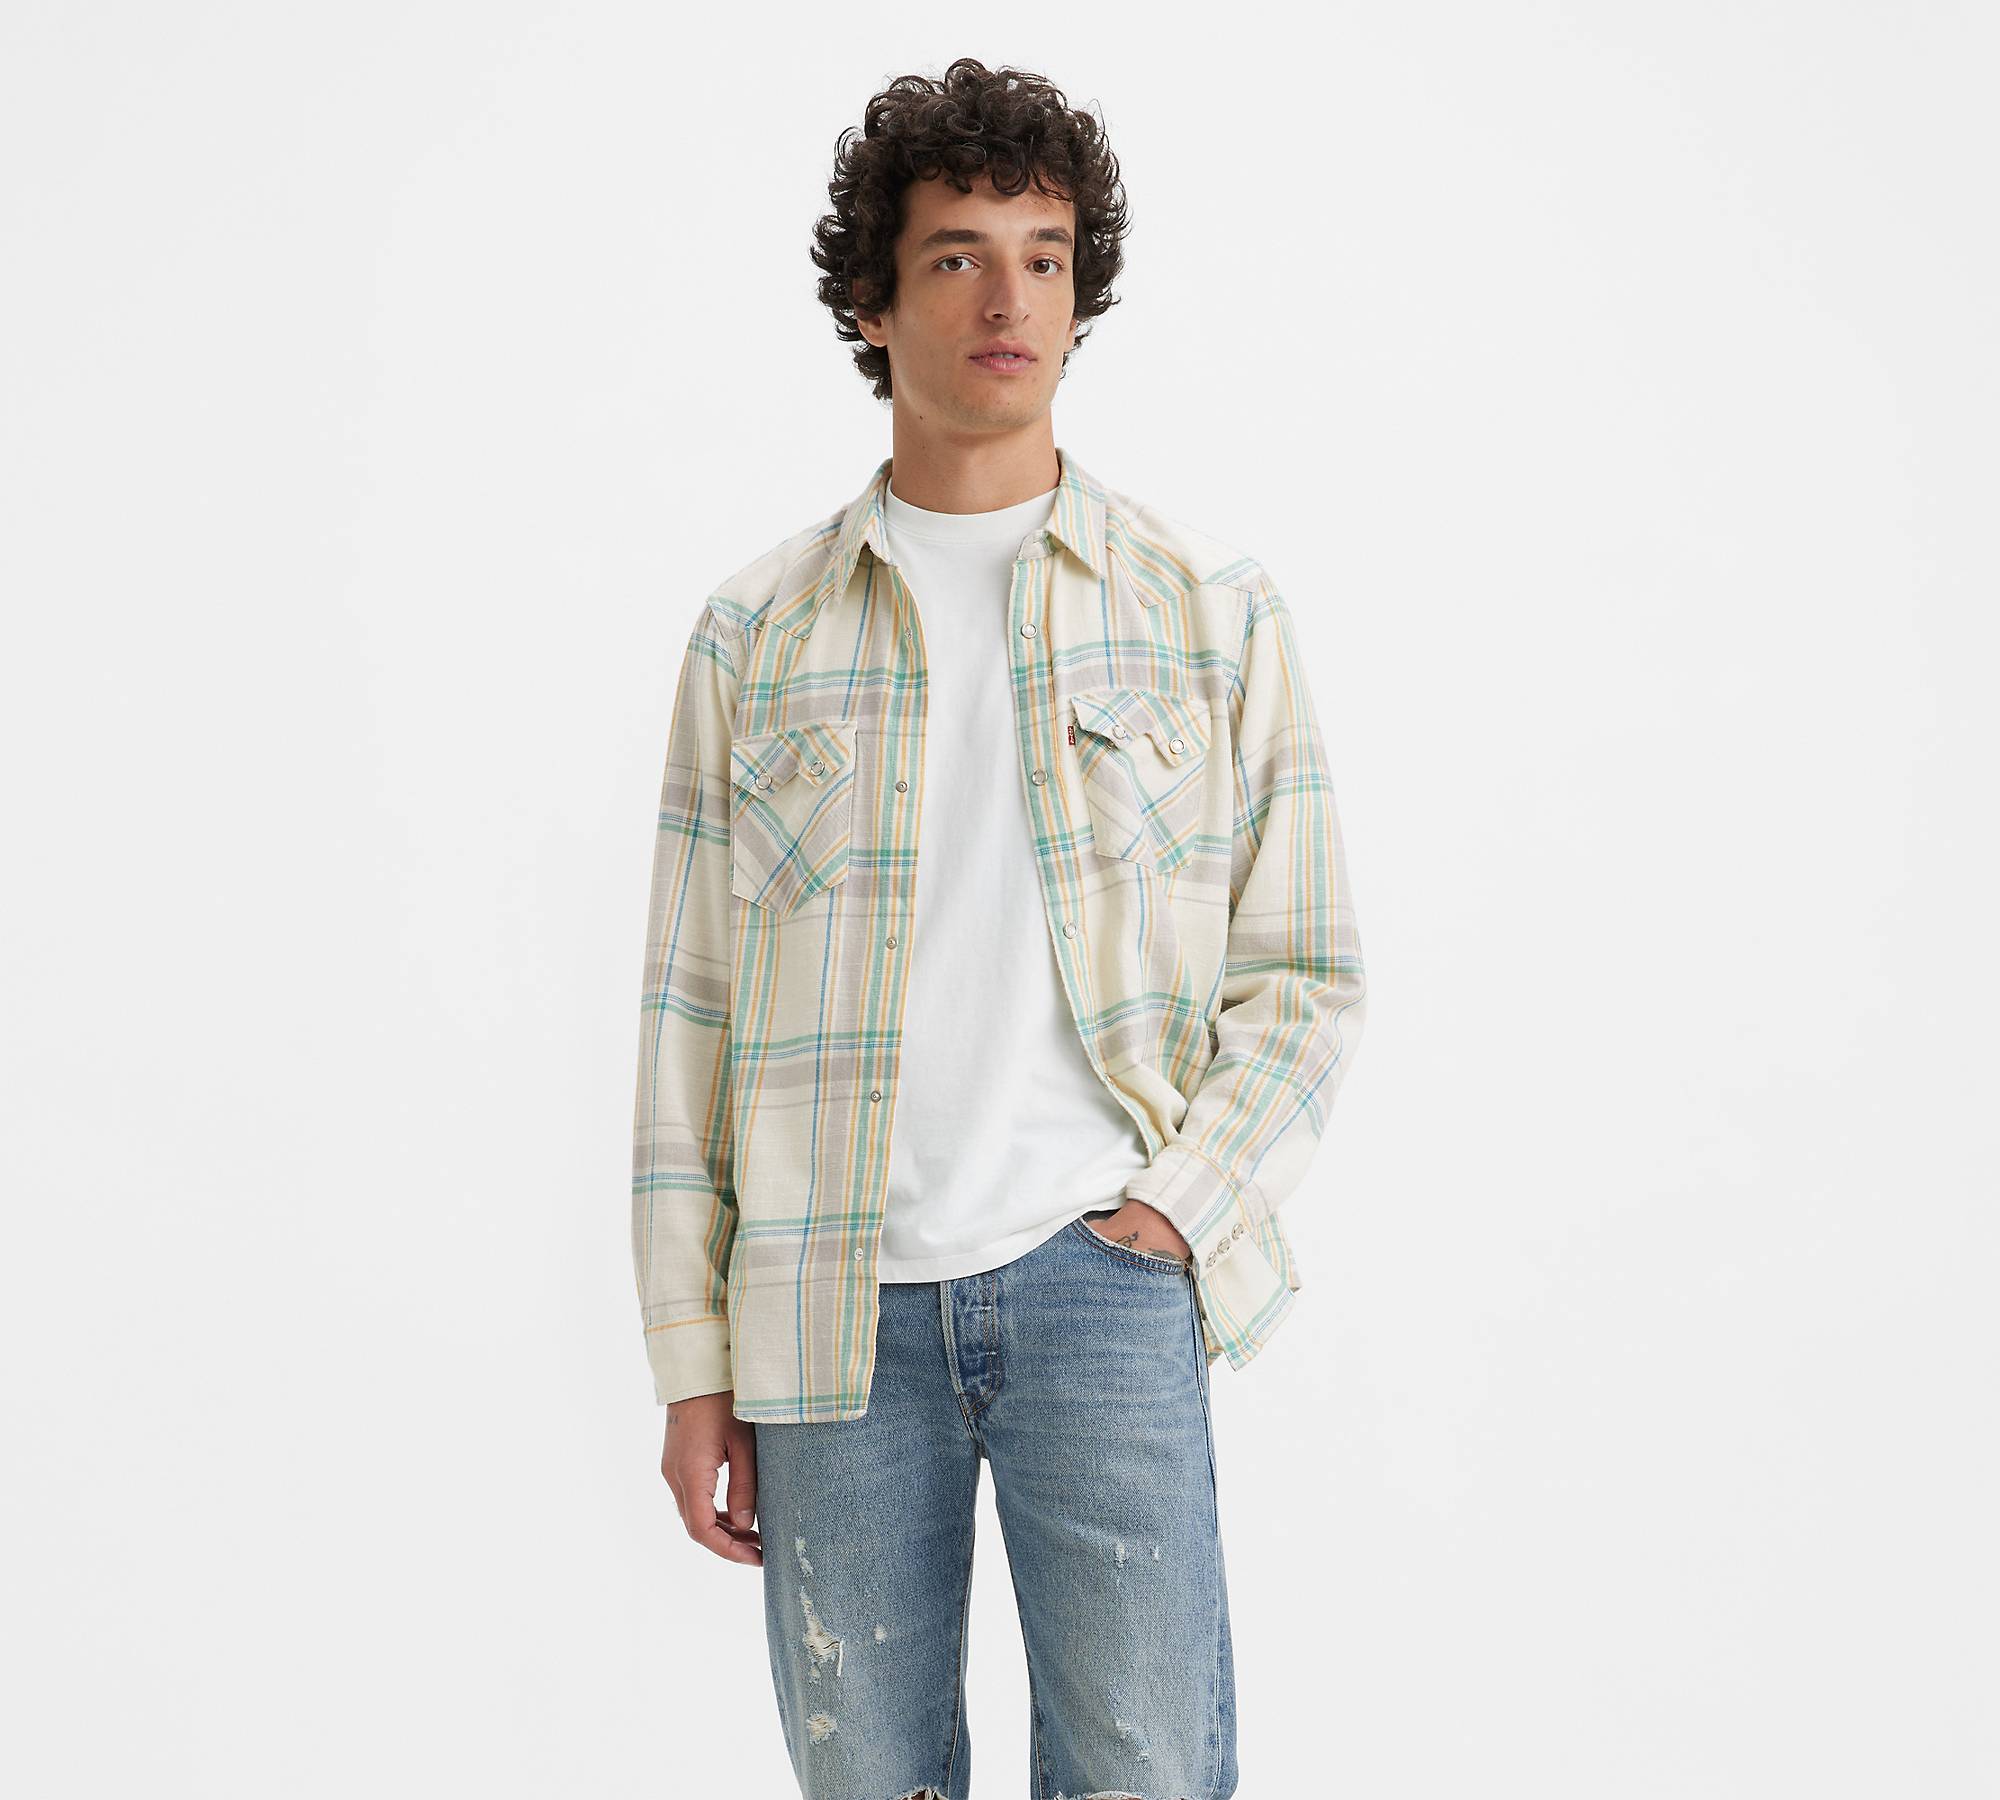 Sawtooth Relaxed Fit Western Shirt - Multi-color | Levi's® US